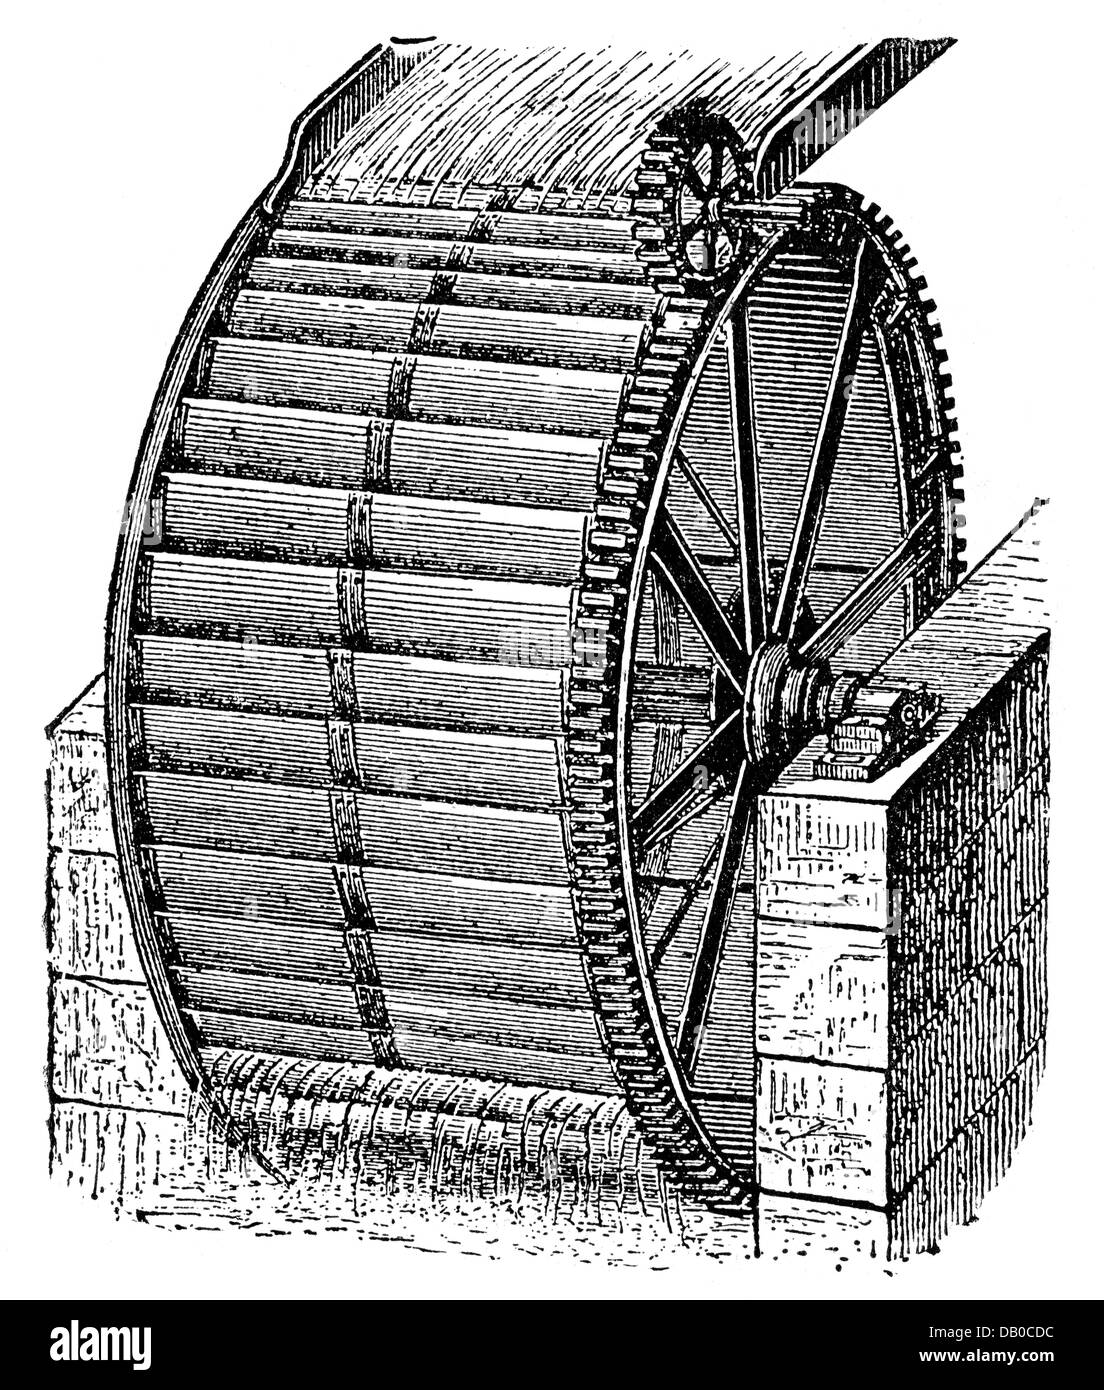 energy, water, water wheels, waterwheel, wood engraving, late 19th century, 19th century, technology, engineering, technologies, technics, impulsion, impulsions, driving power, motive power, power generation, water power, waterpower, hydropower, water powers, hydroelectricity, historic, historical, Additional-Rights-Clearences-Not Available Stock Photo